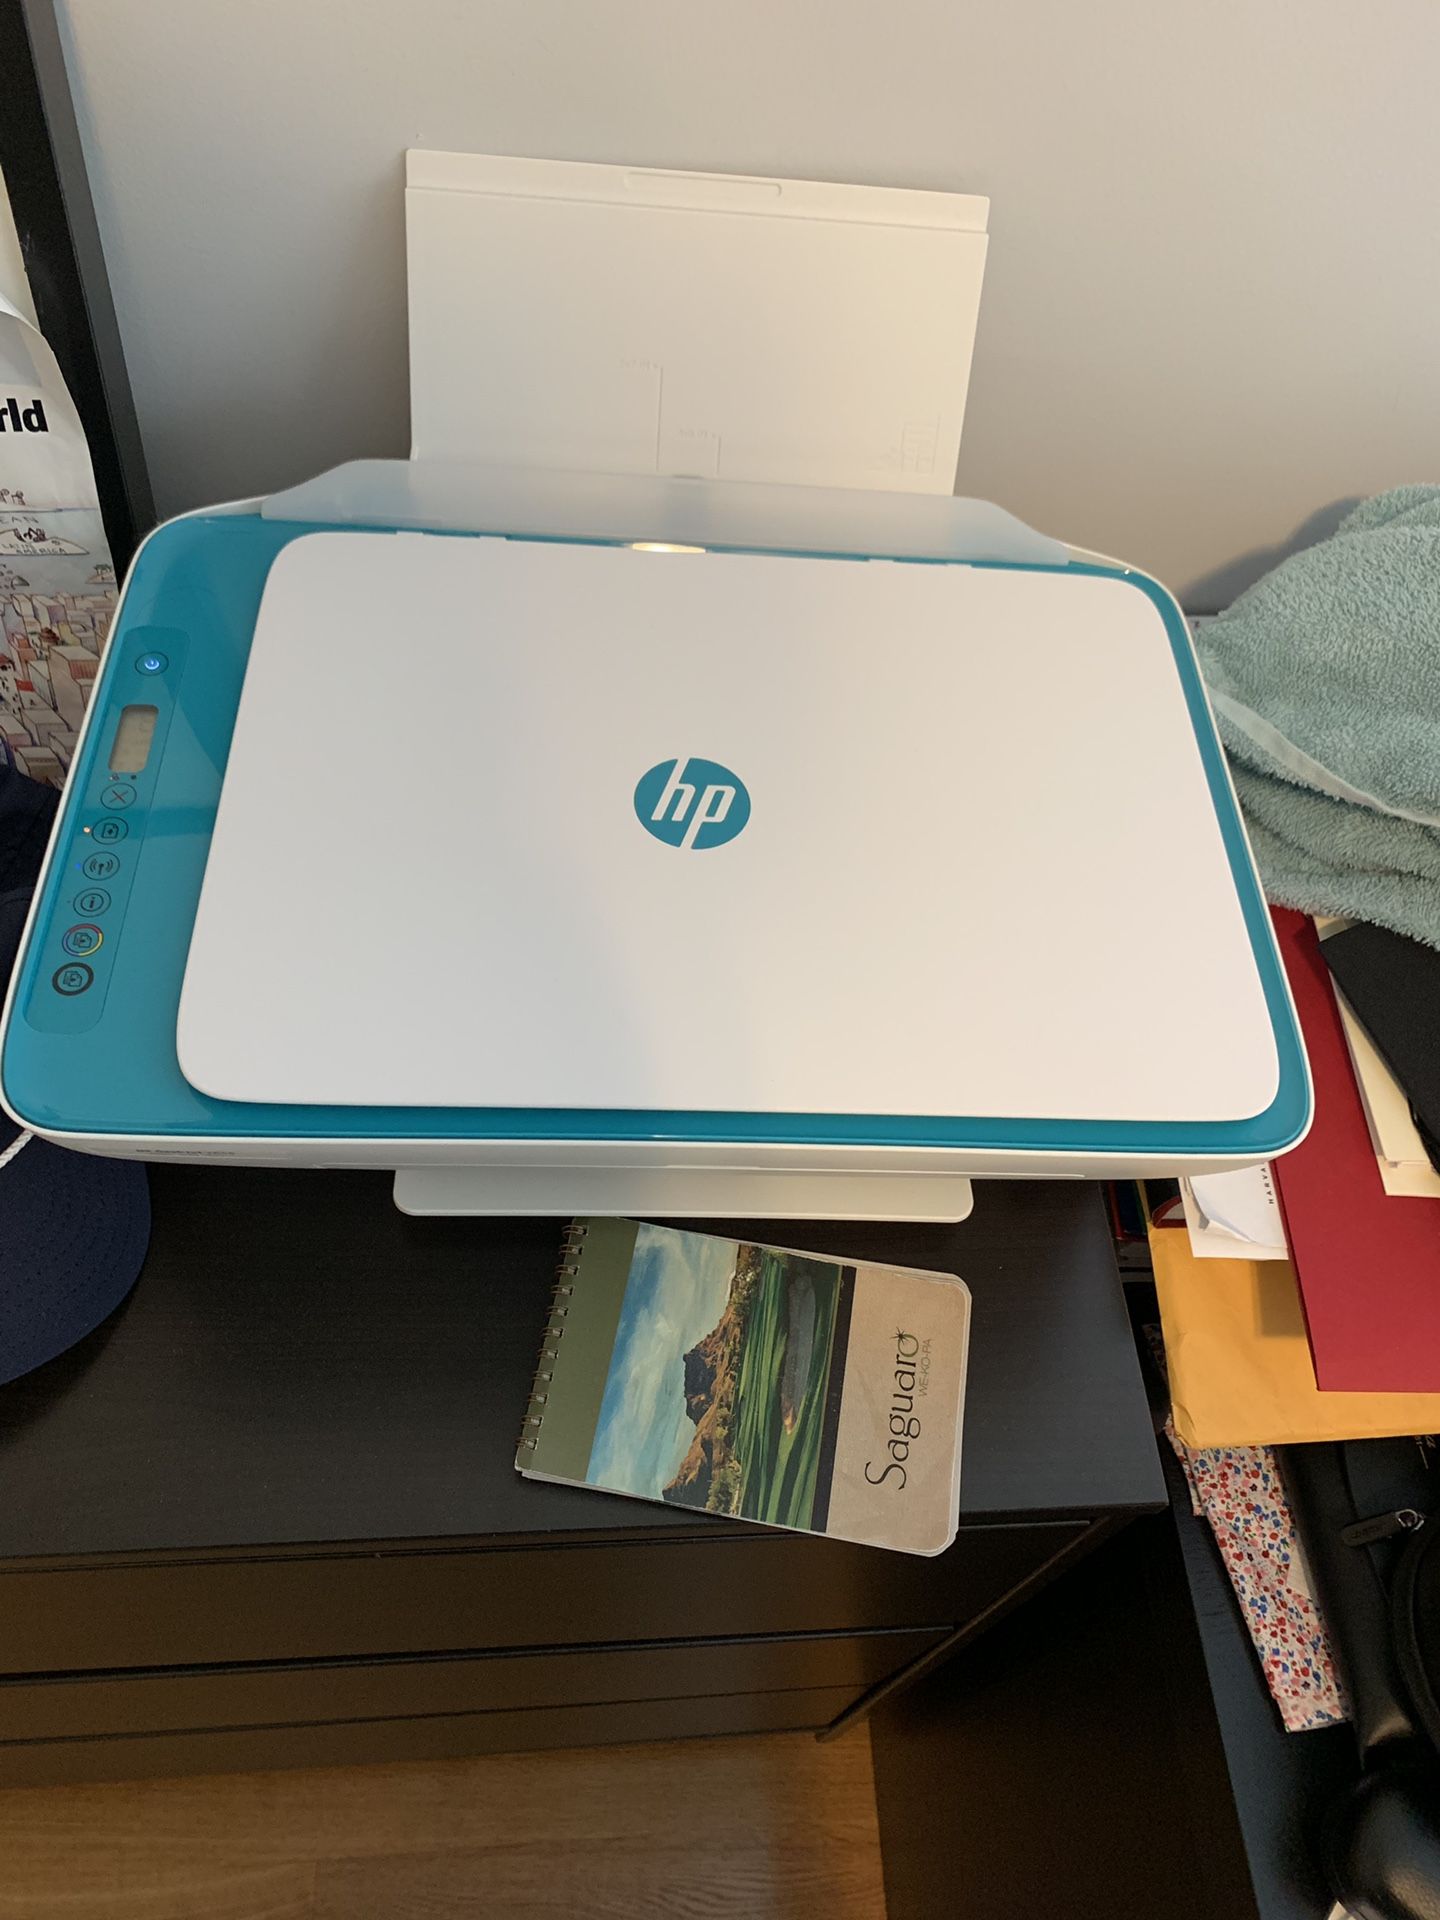 HP DeskJet 2655 with wireless and mobile printing! ($25)